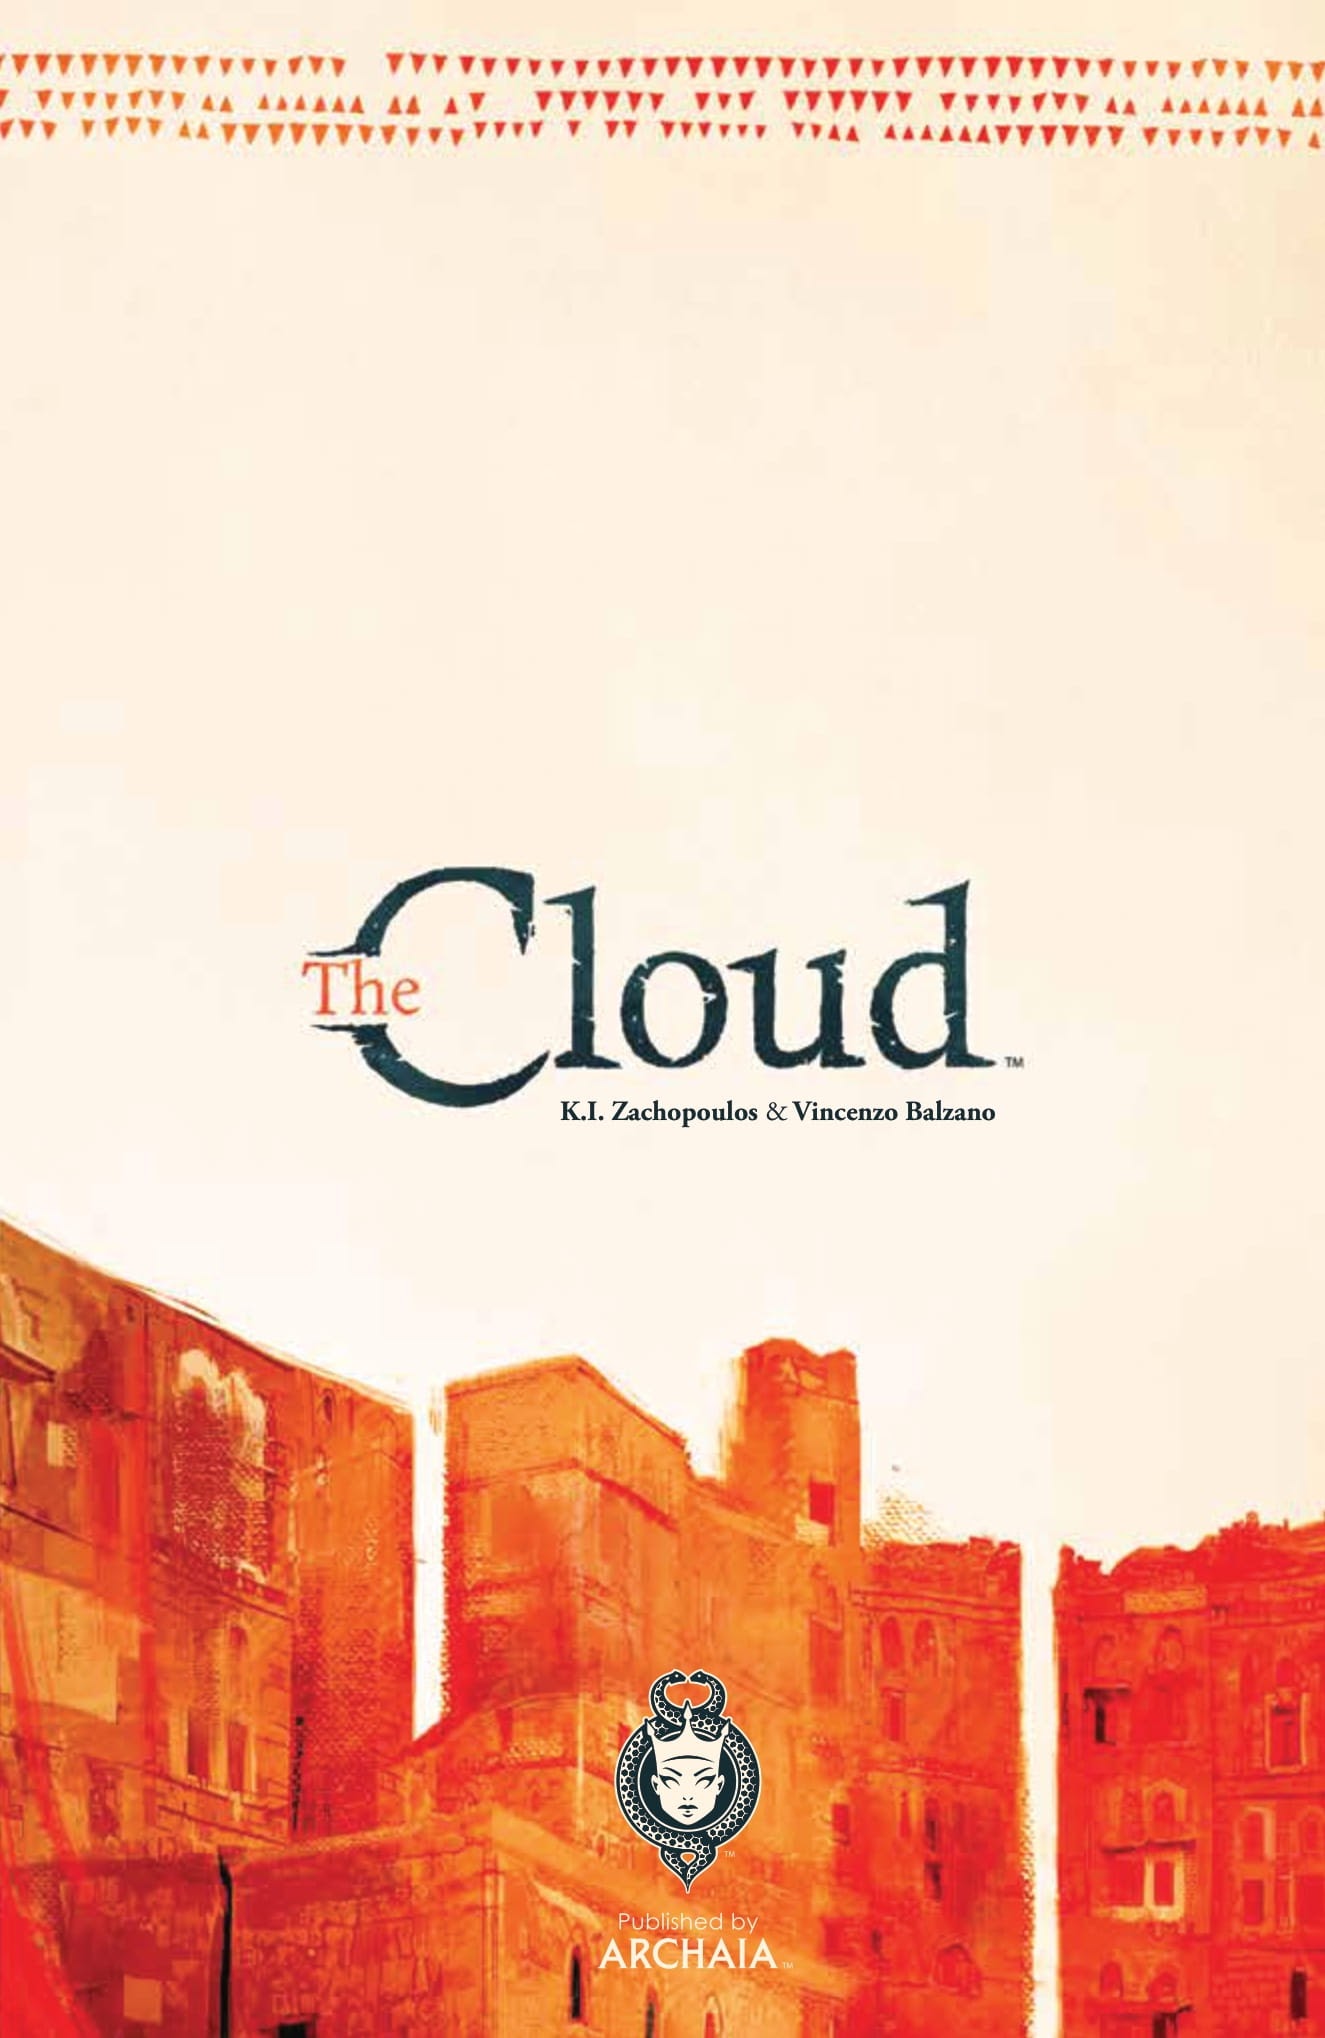 Read online The Cloud comic -  Issue # TPB - 4